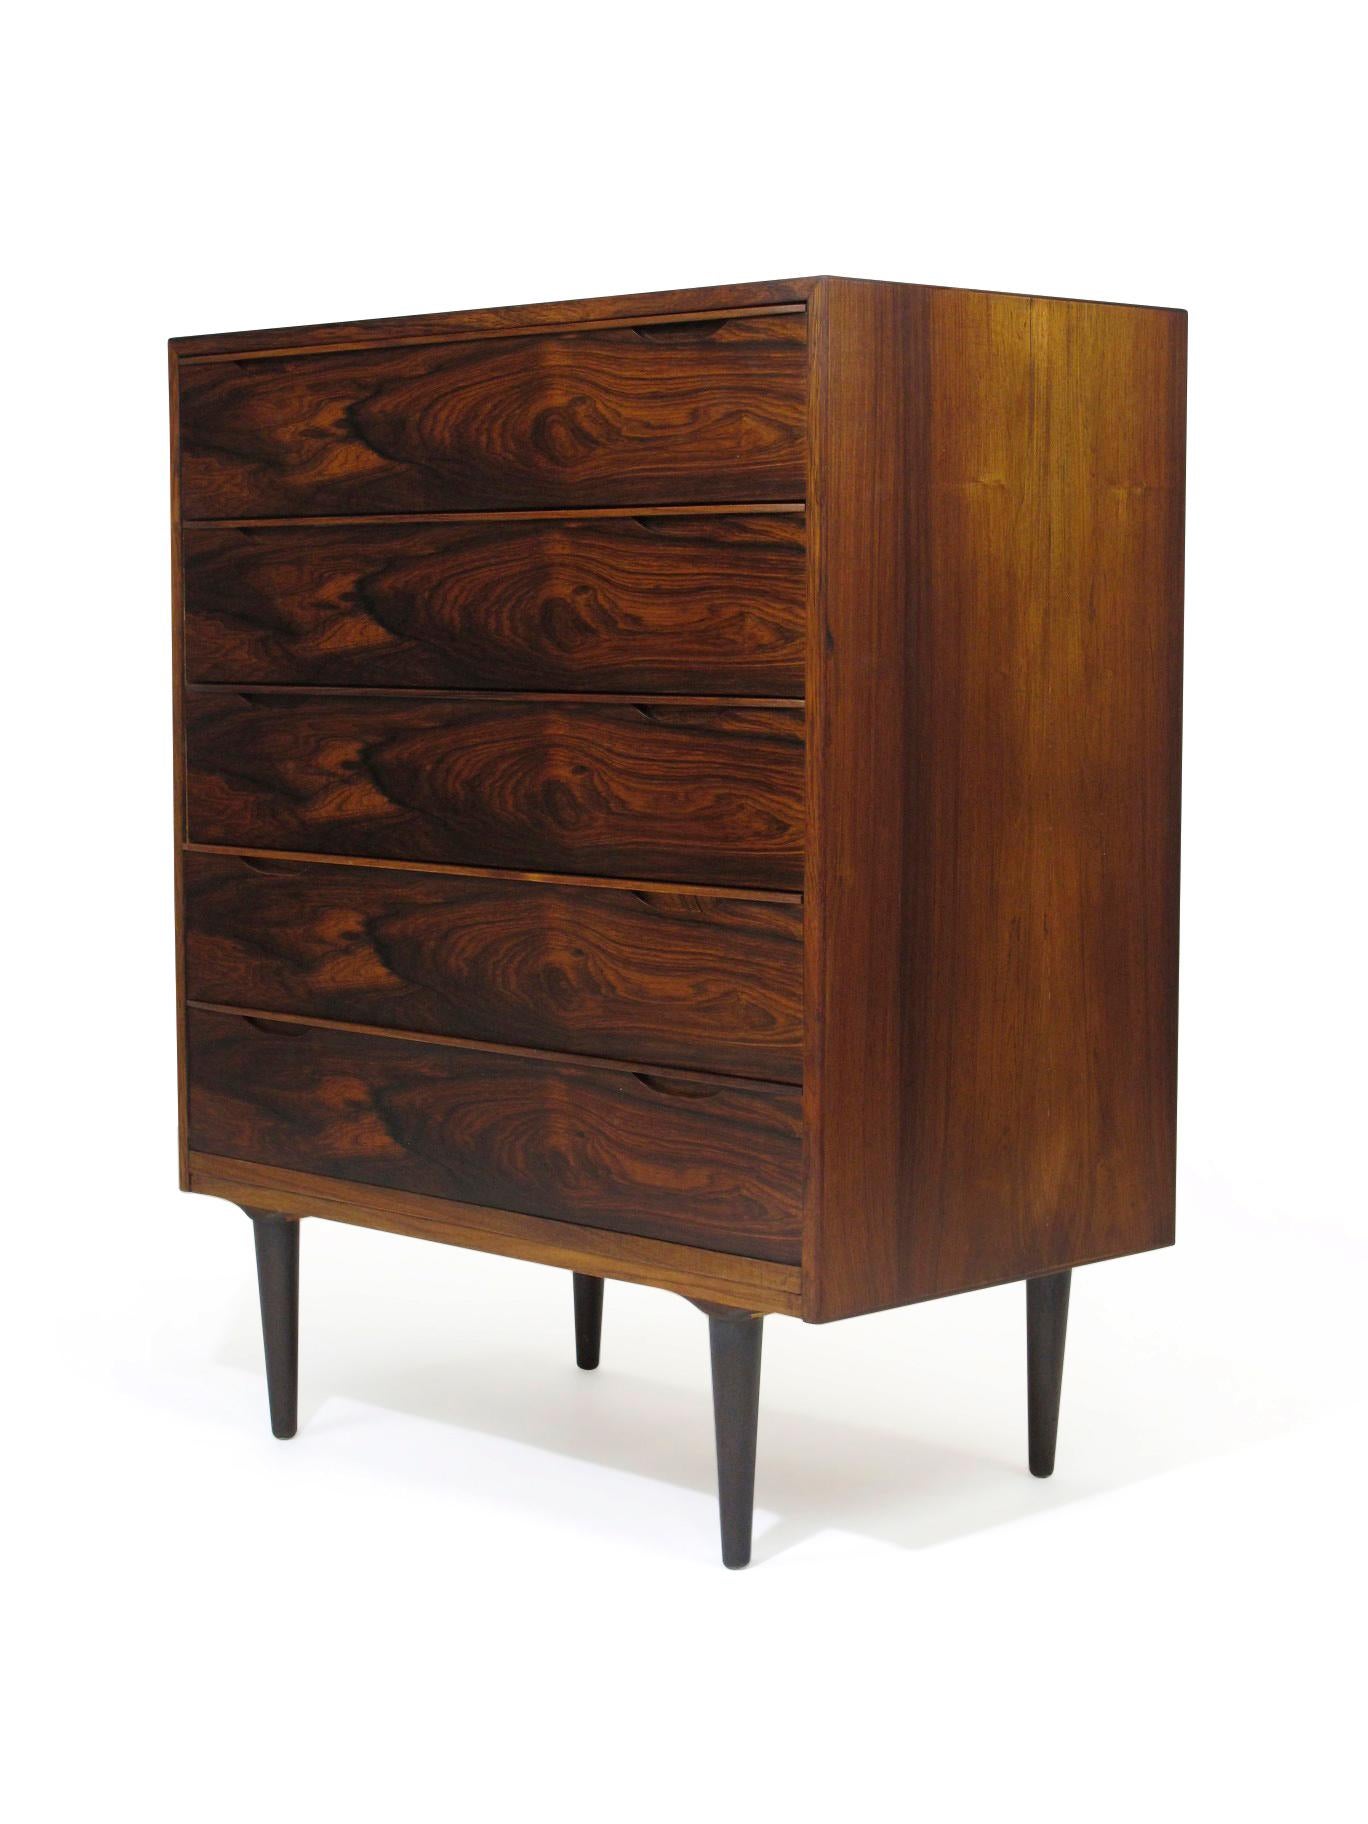 Mid-century Danish dresser crafted of Brazilian Rosewood with stunning pattern match on front of drawers. Interior drawers of cuban mahogany with lounge and grover joinery, top drawer with dividers. The finely crafted cabinet has mitered edges and